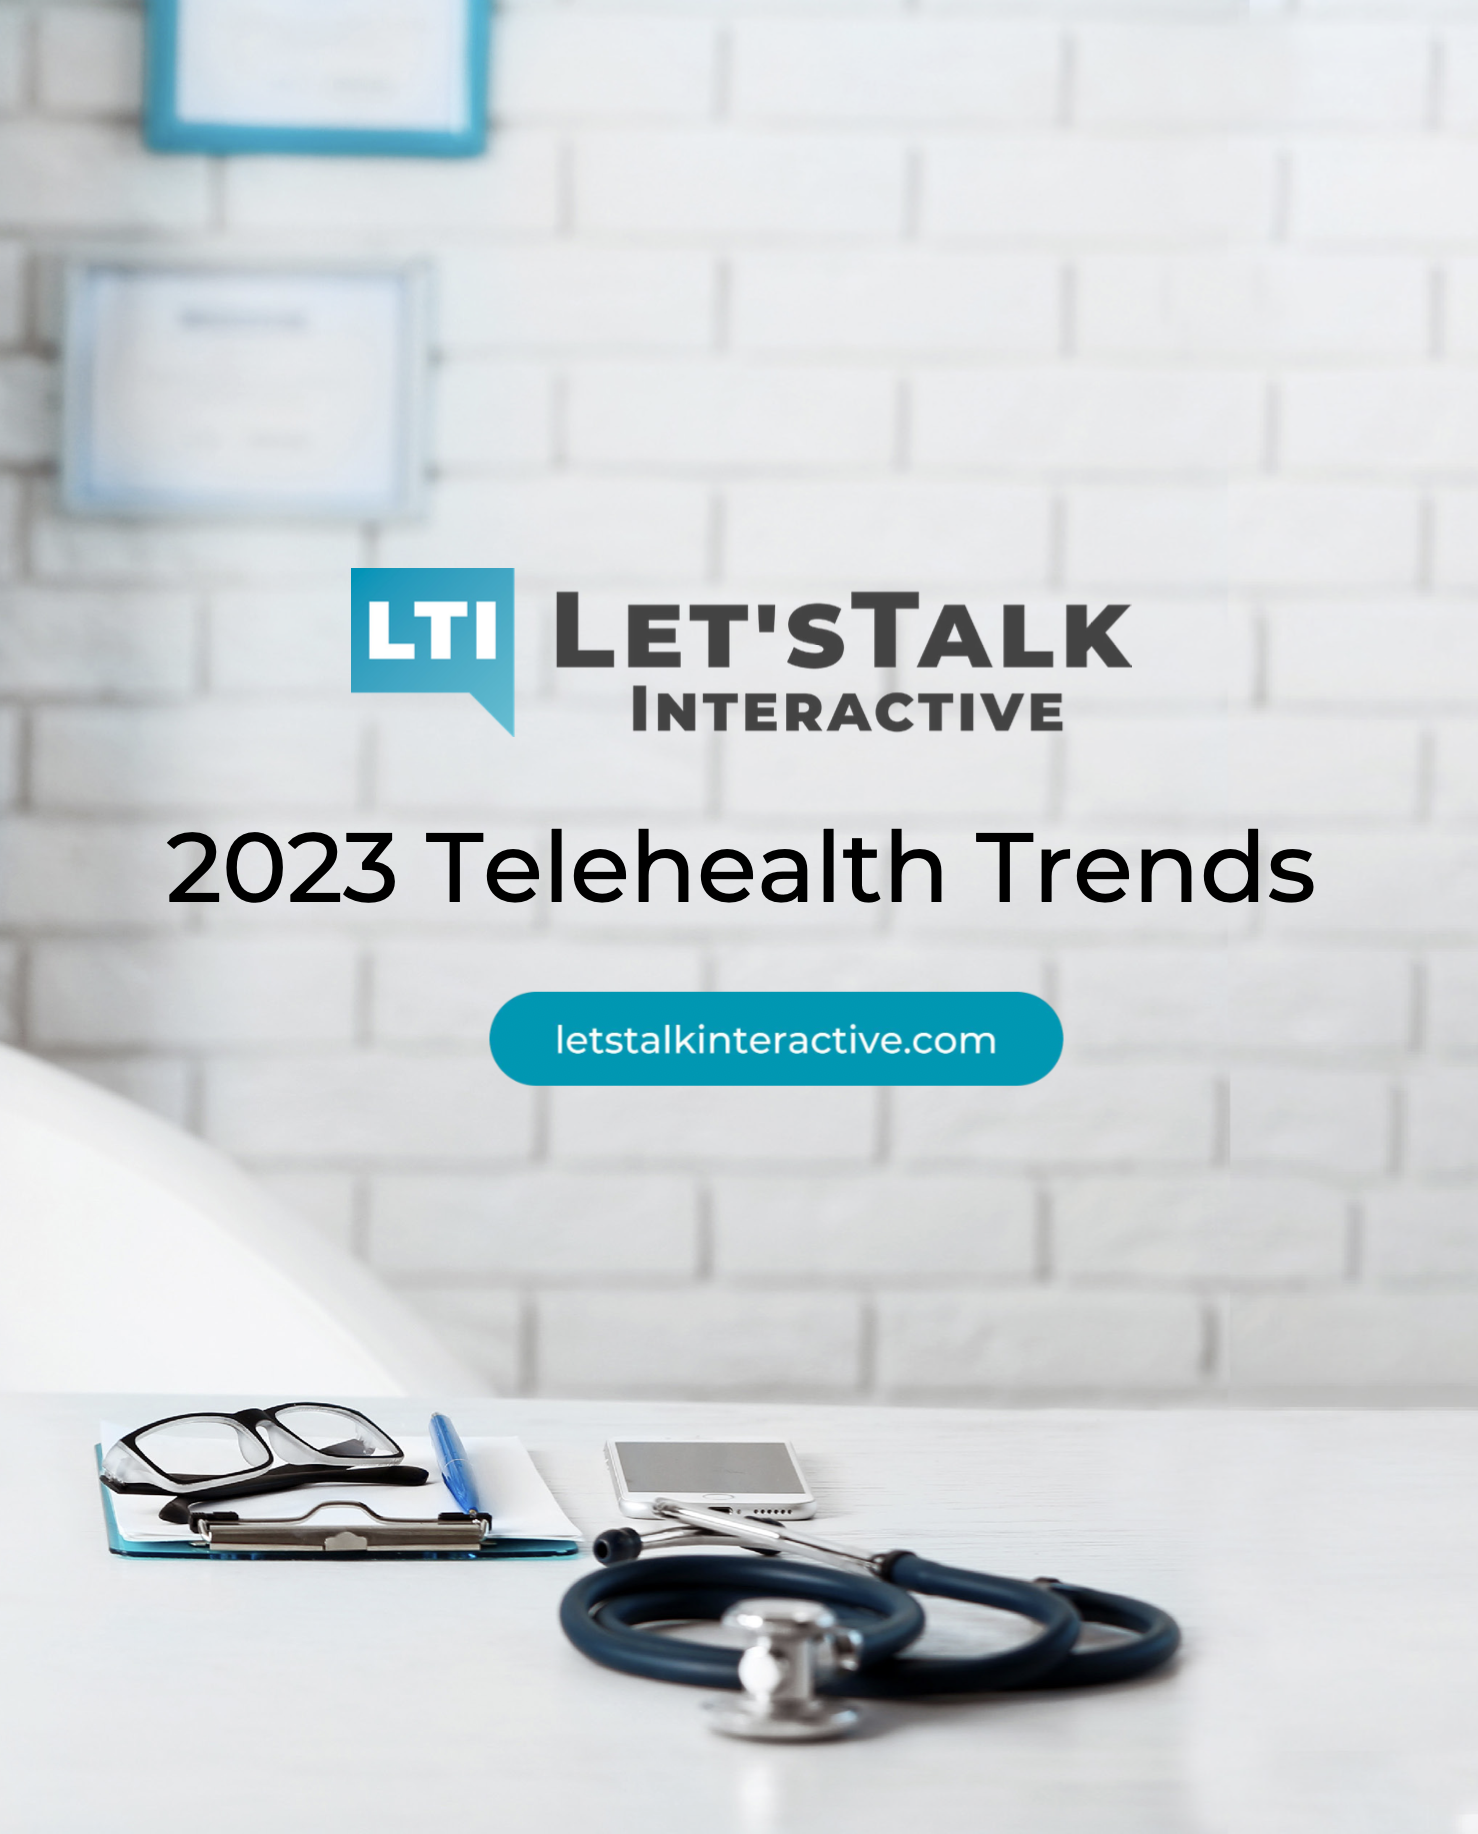 What's new in Telehealth in 2023?